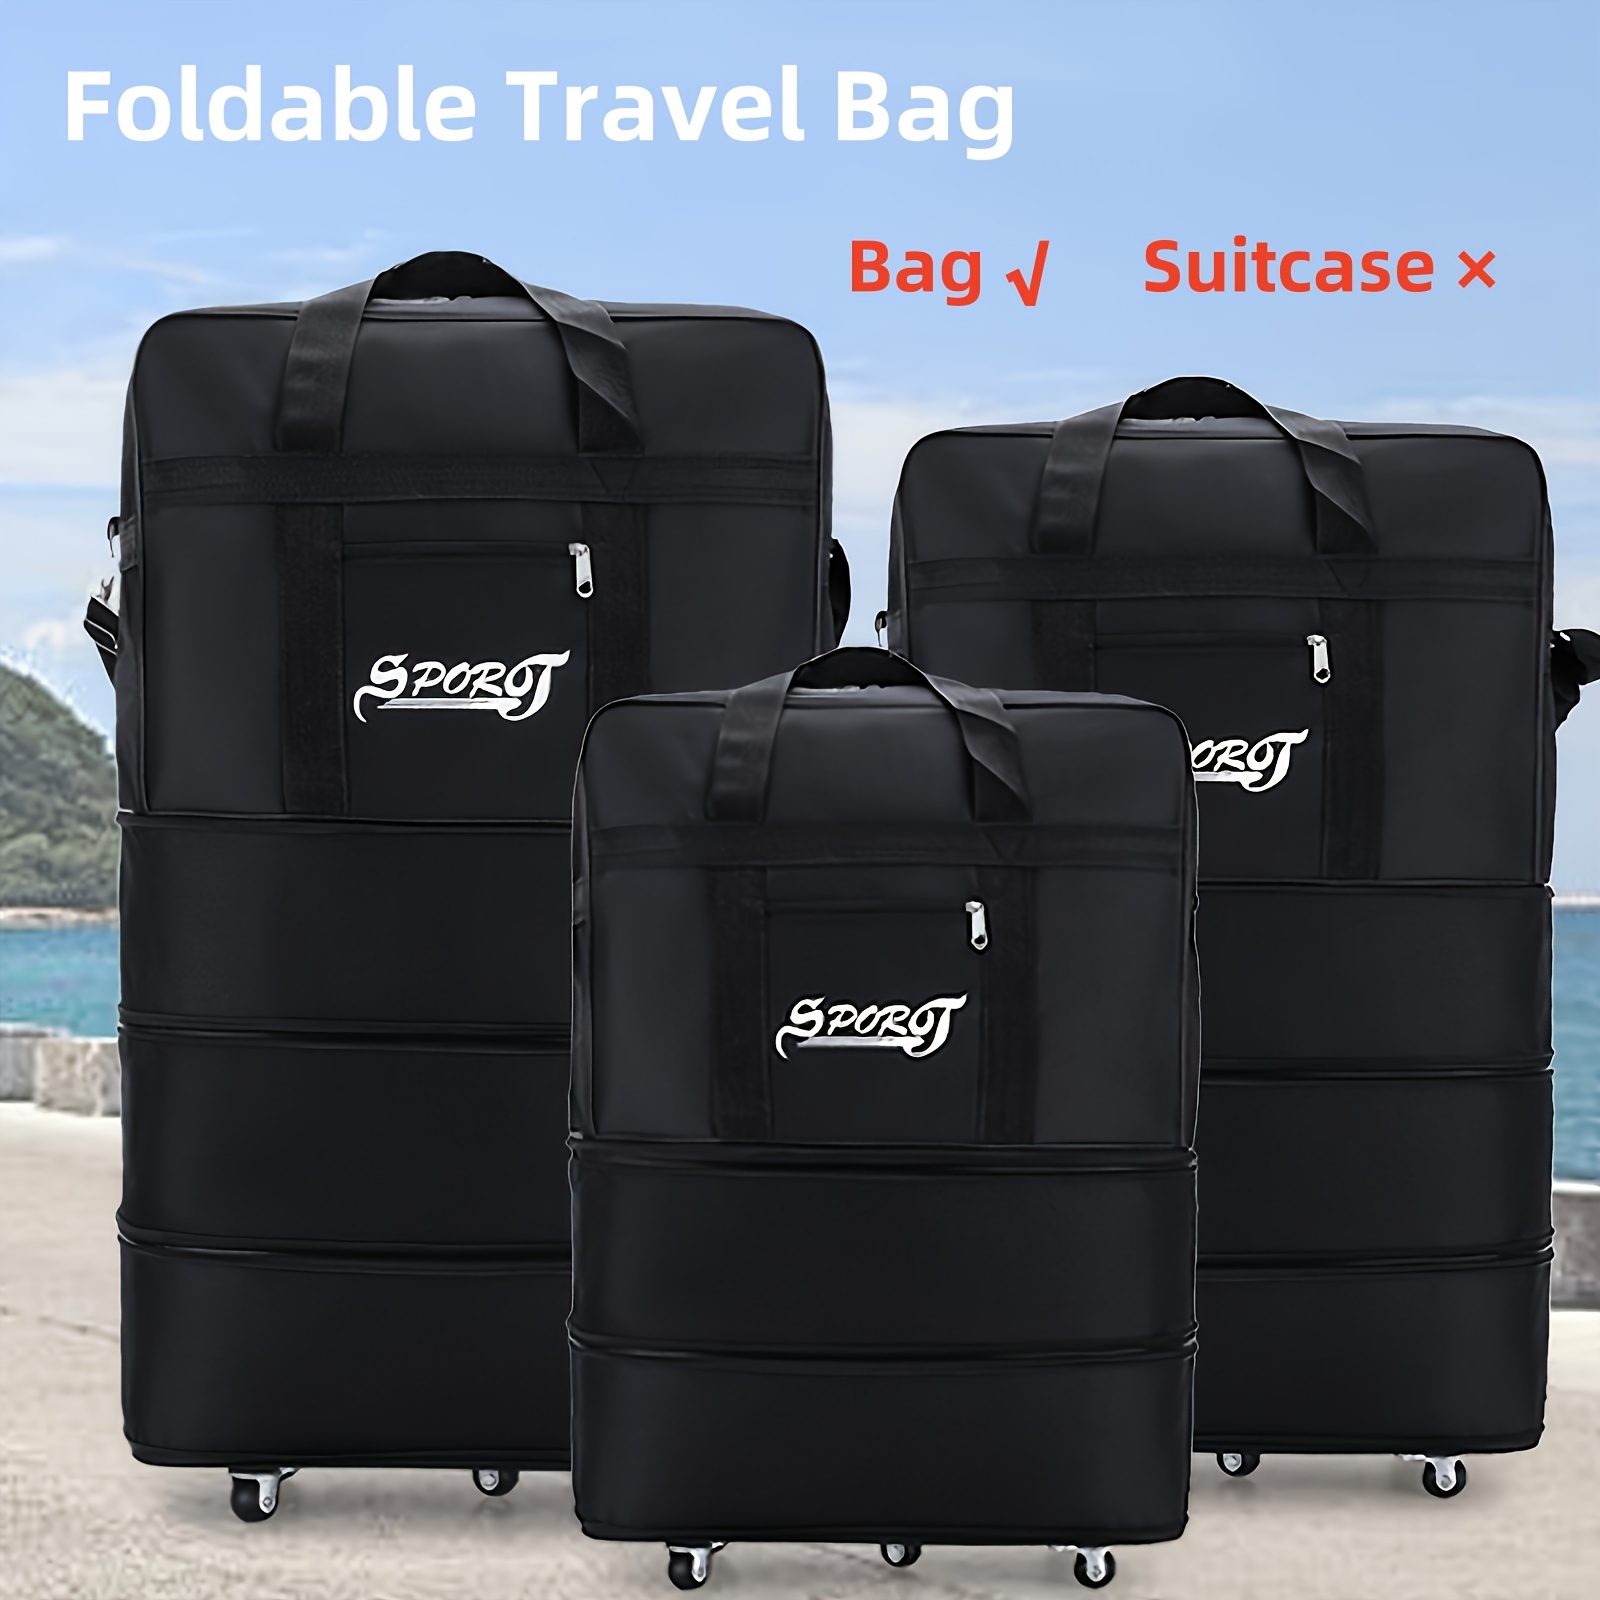 

Large Capacity Foldable Wheeled Travel Bag, Versatile Ideal For Travel, Adventure, And Outdoor Activities